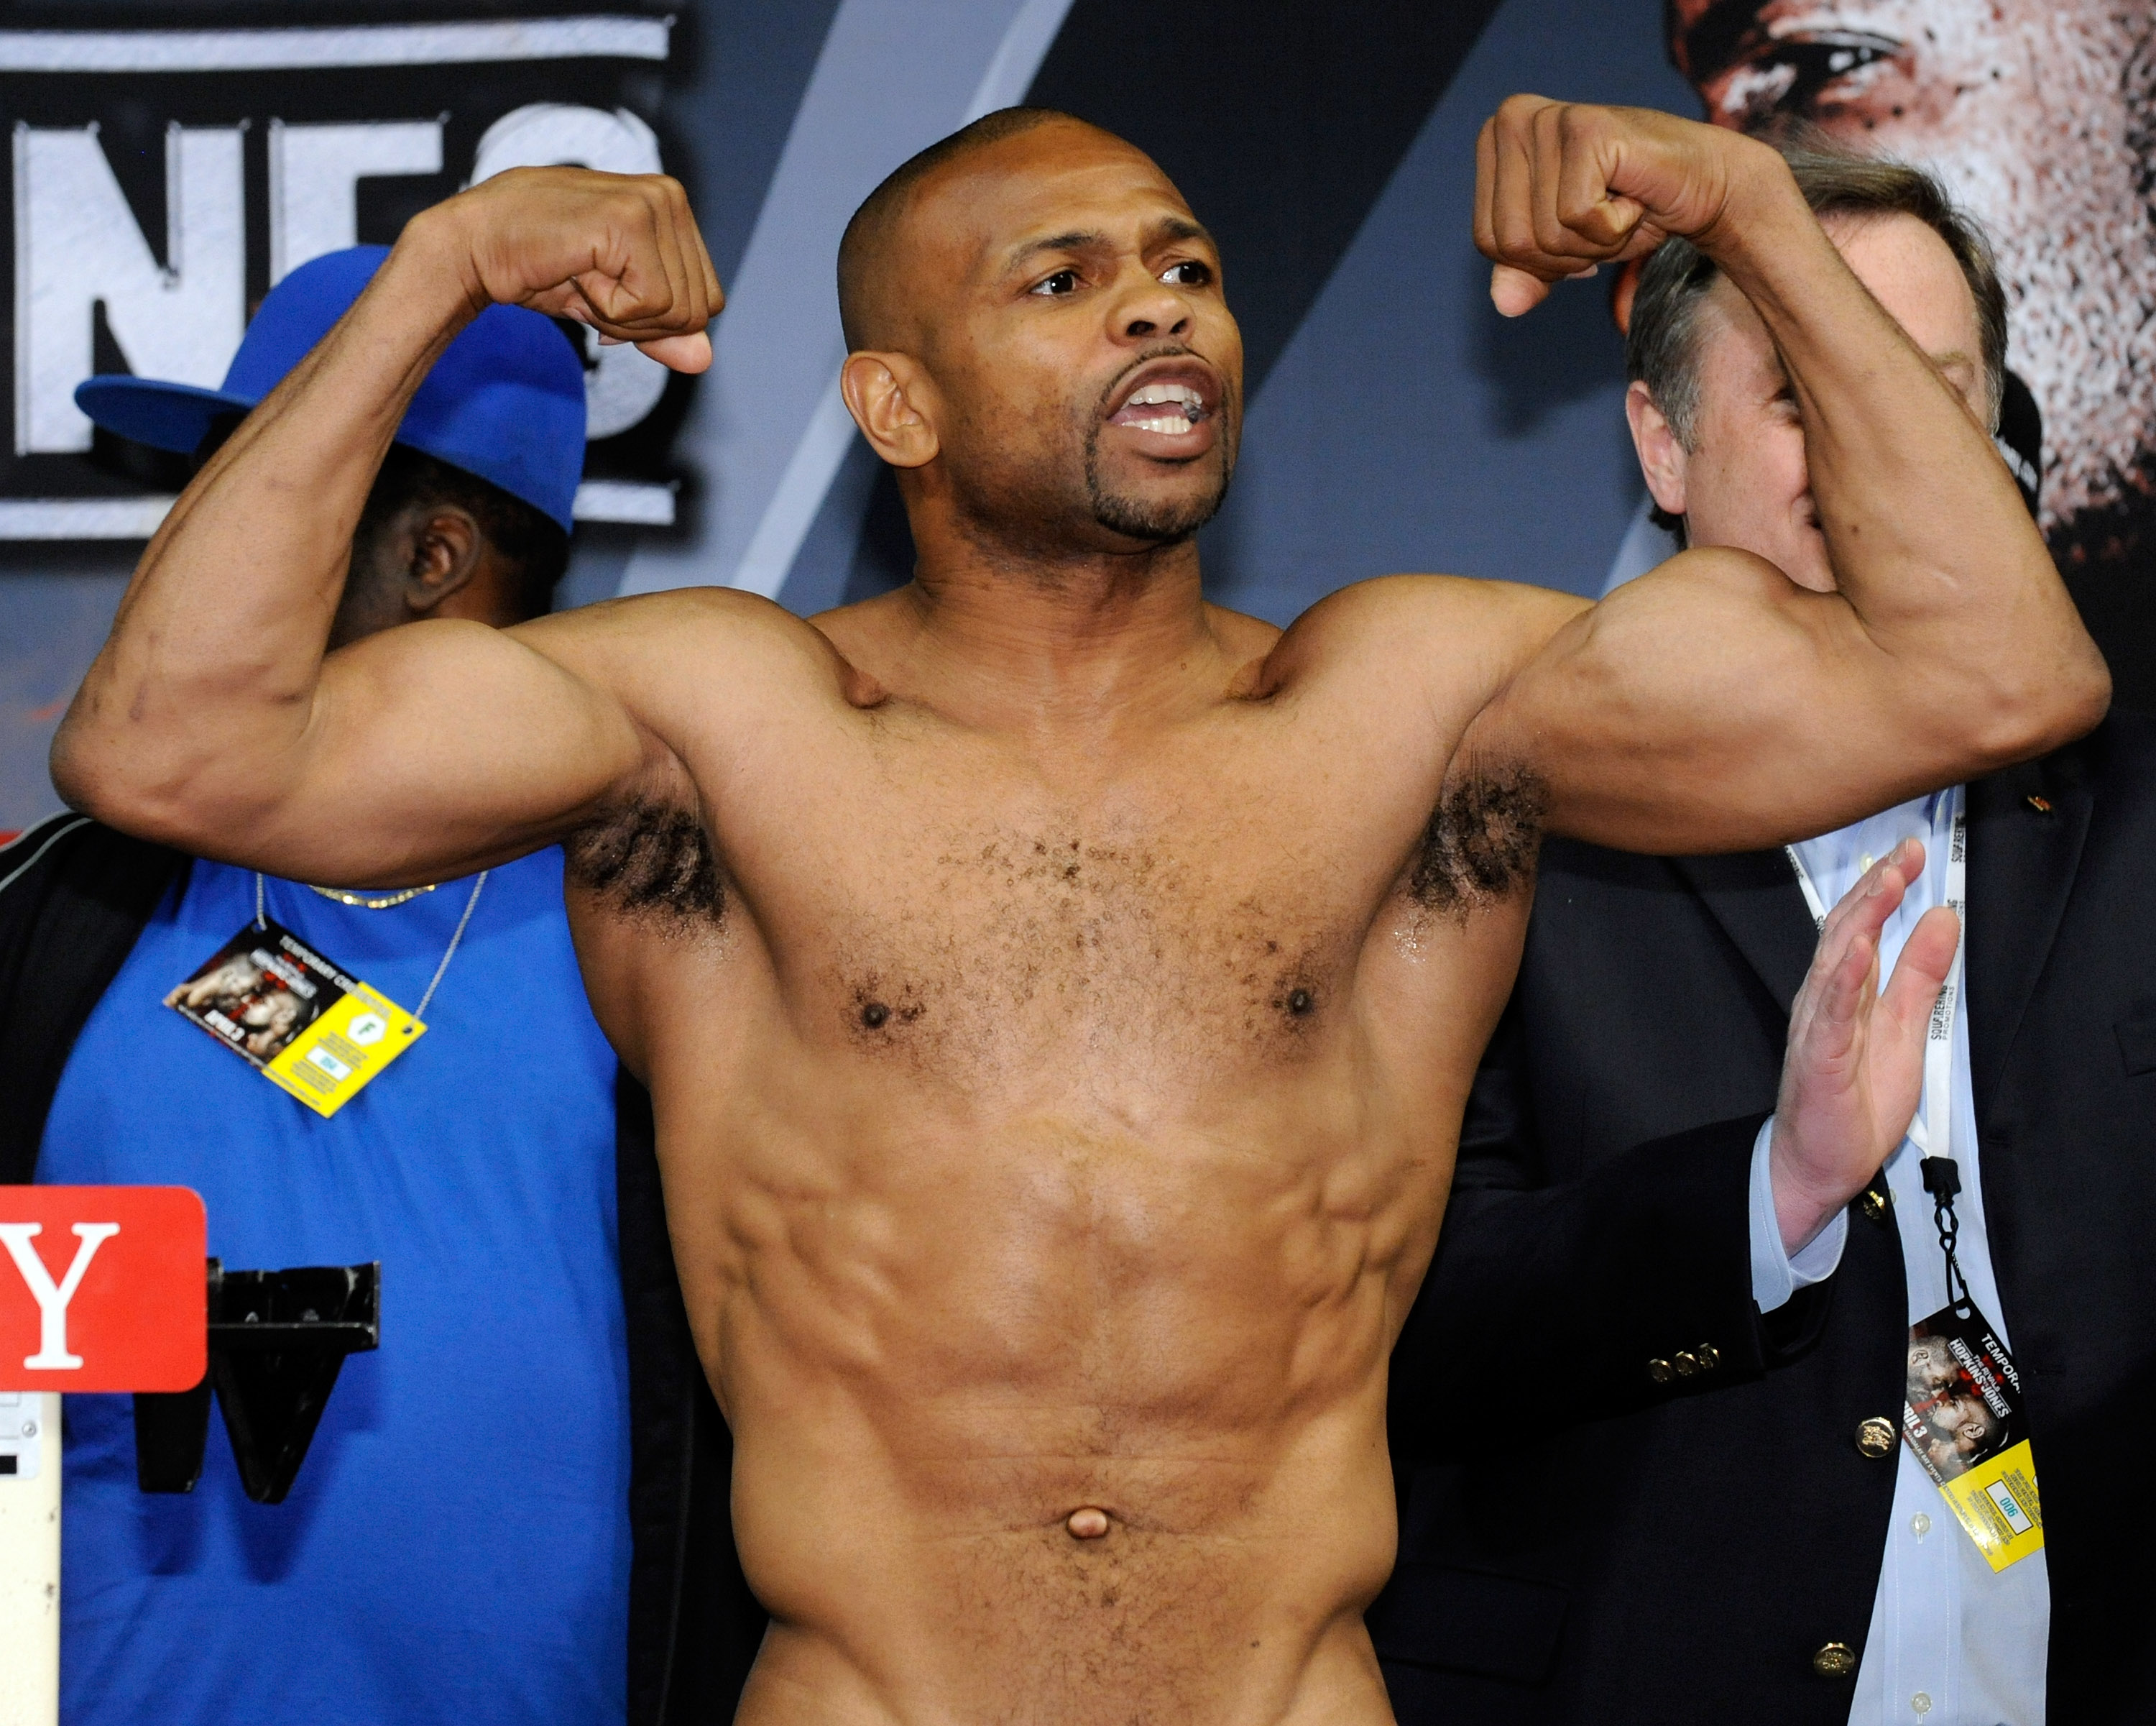 LAS VEGAS - APRIL 02:  Boxer Roy Jones Jr. poses during the official weigh-in for his bout against Bernard Hopkins at the Mandalay Bay Events Center April 2, 2010 in Las Vegas, Nevada. The two will meet in a light heavyweight bout on April 3 in Las Vegas.